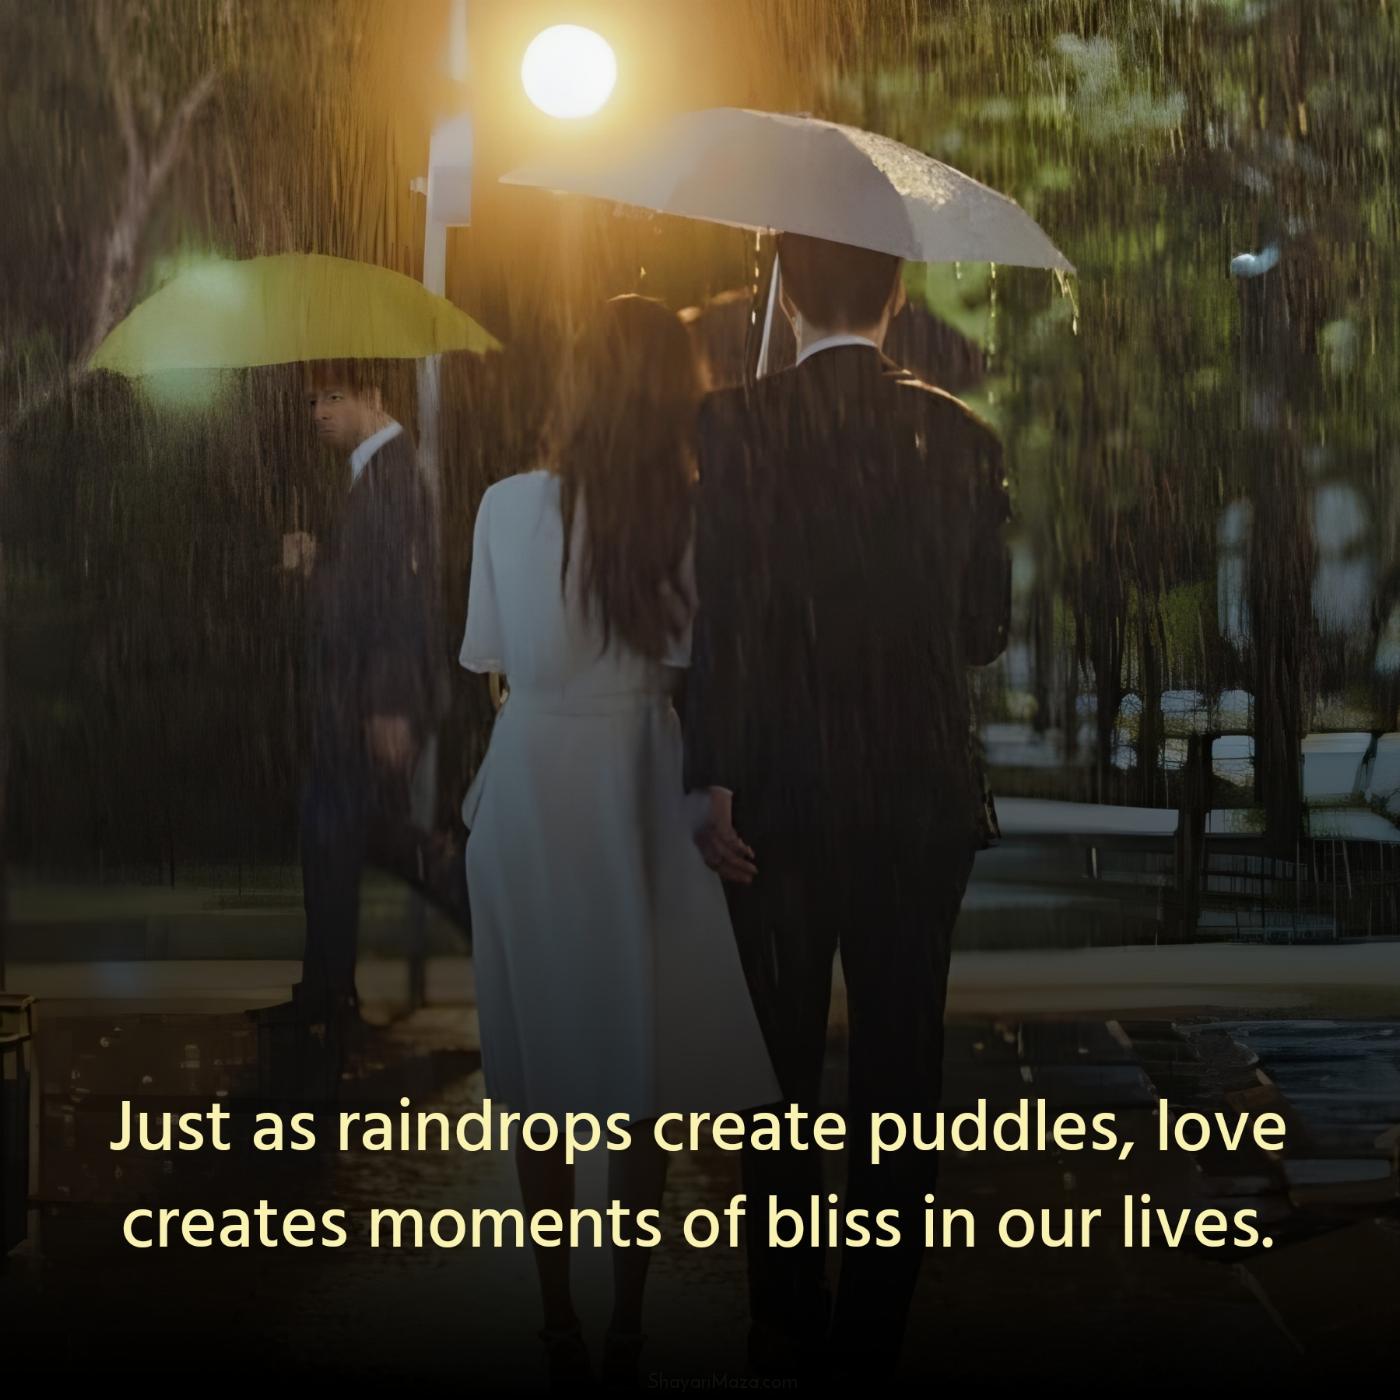 Just as raindrops create puddles love creates moments of bliss